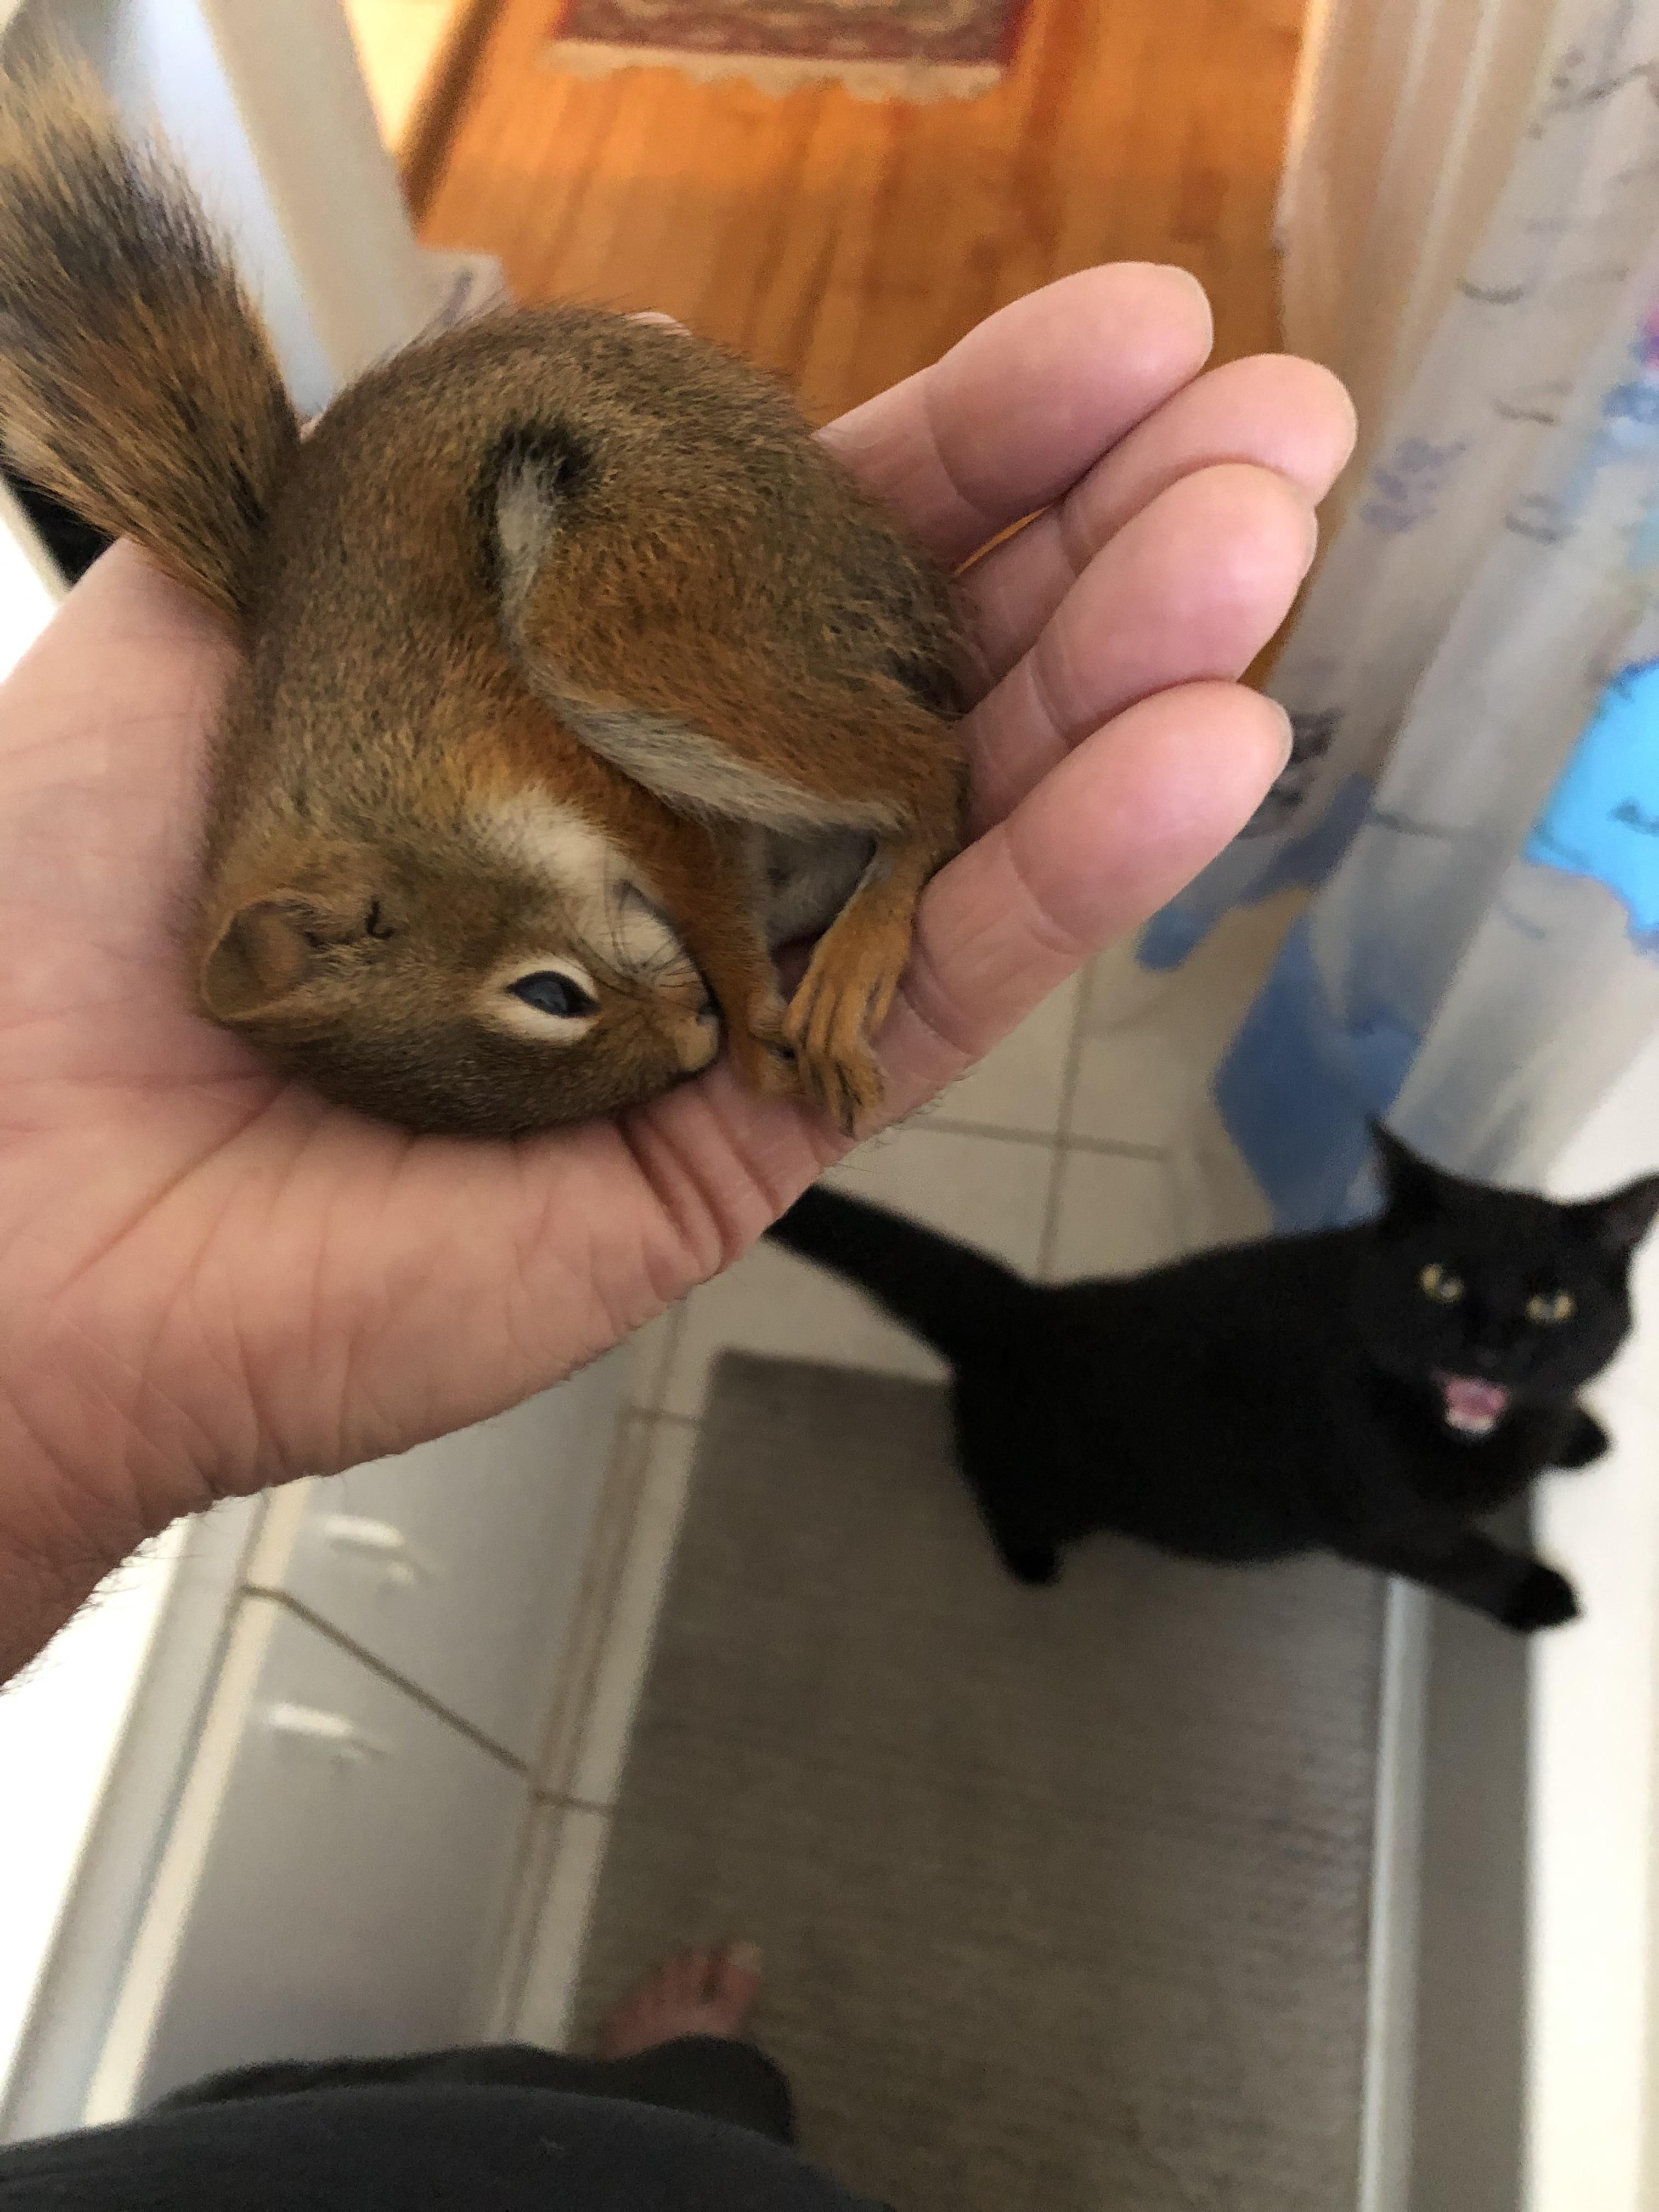 I saved this little squirrel but my cat wasn’t very pleased…